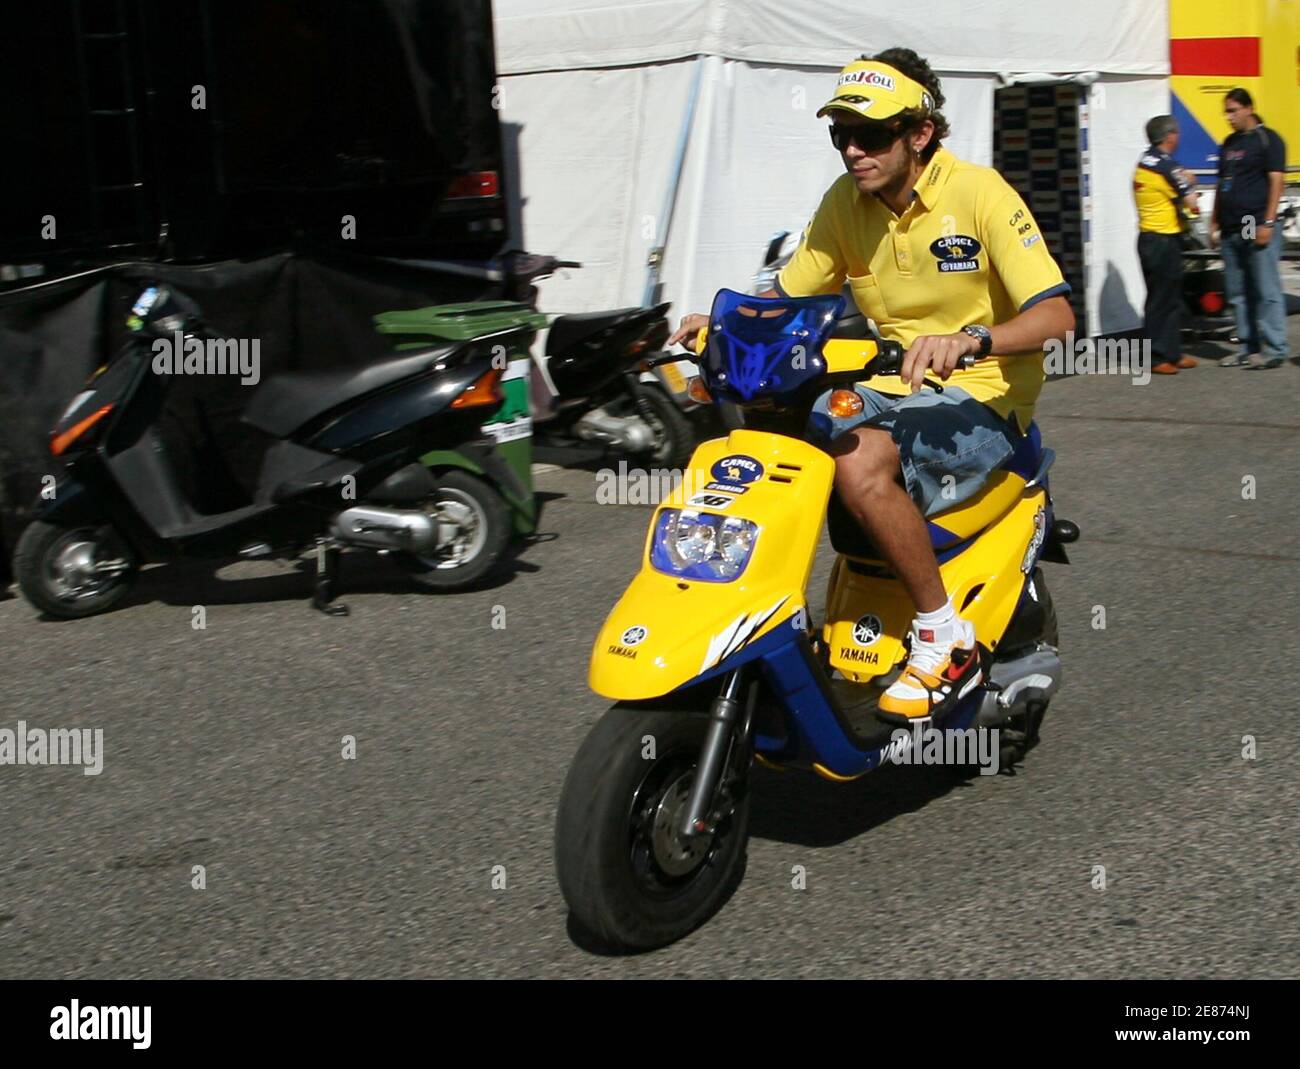 Yamaha motoGP rider Valentino Rossi of Italy rides a scooter after  finishing the third free practice session of the Portugese Grand Prix in  Estoril October 14, 2006. REUTERS/Marcelo del Pozo (PORTUGAL Stock